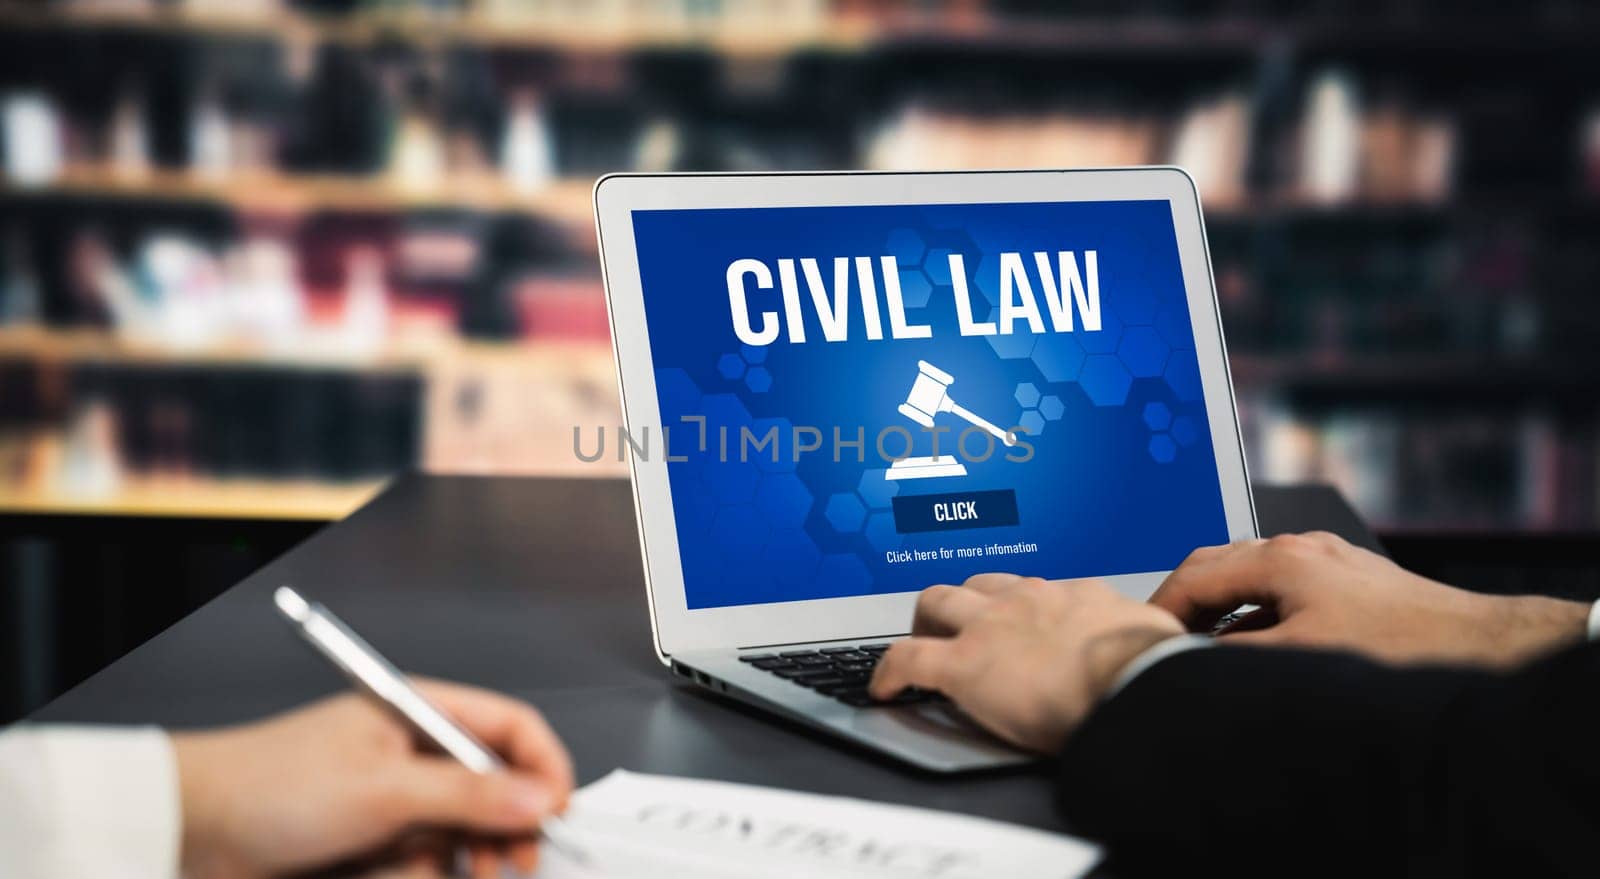 Civil law savvy information showing on laptop computer screen by biancoblue